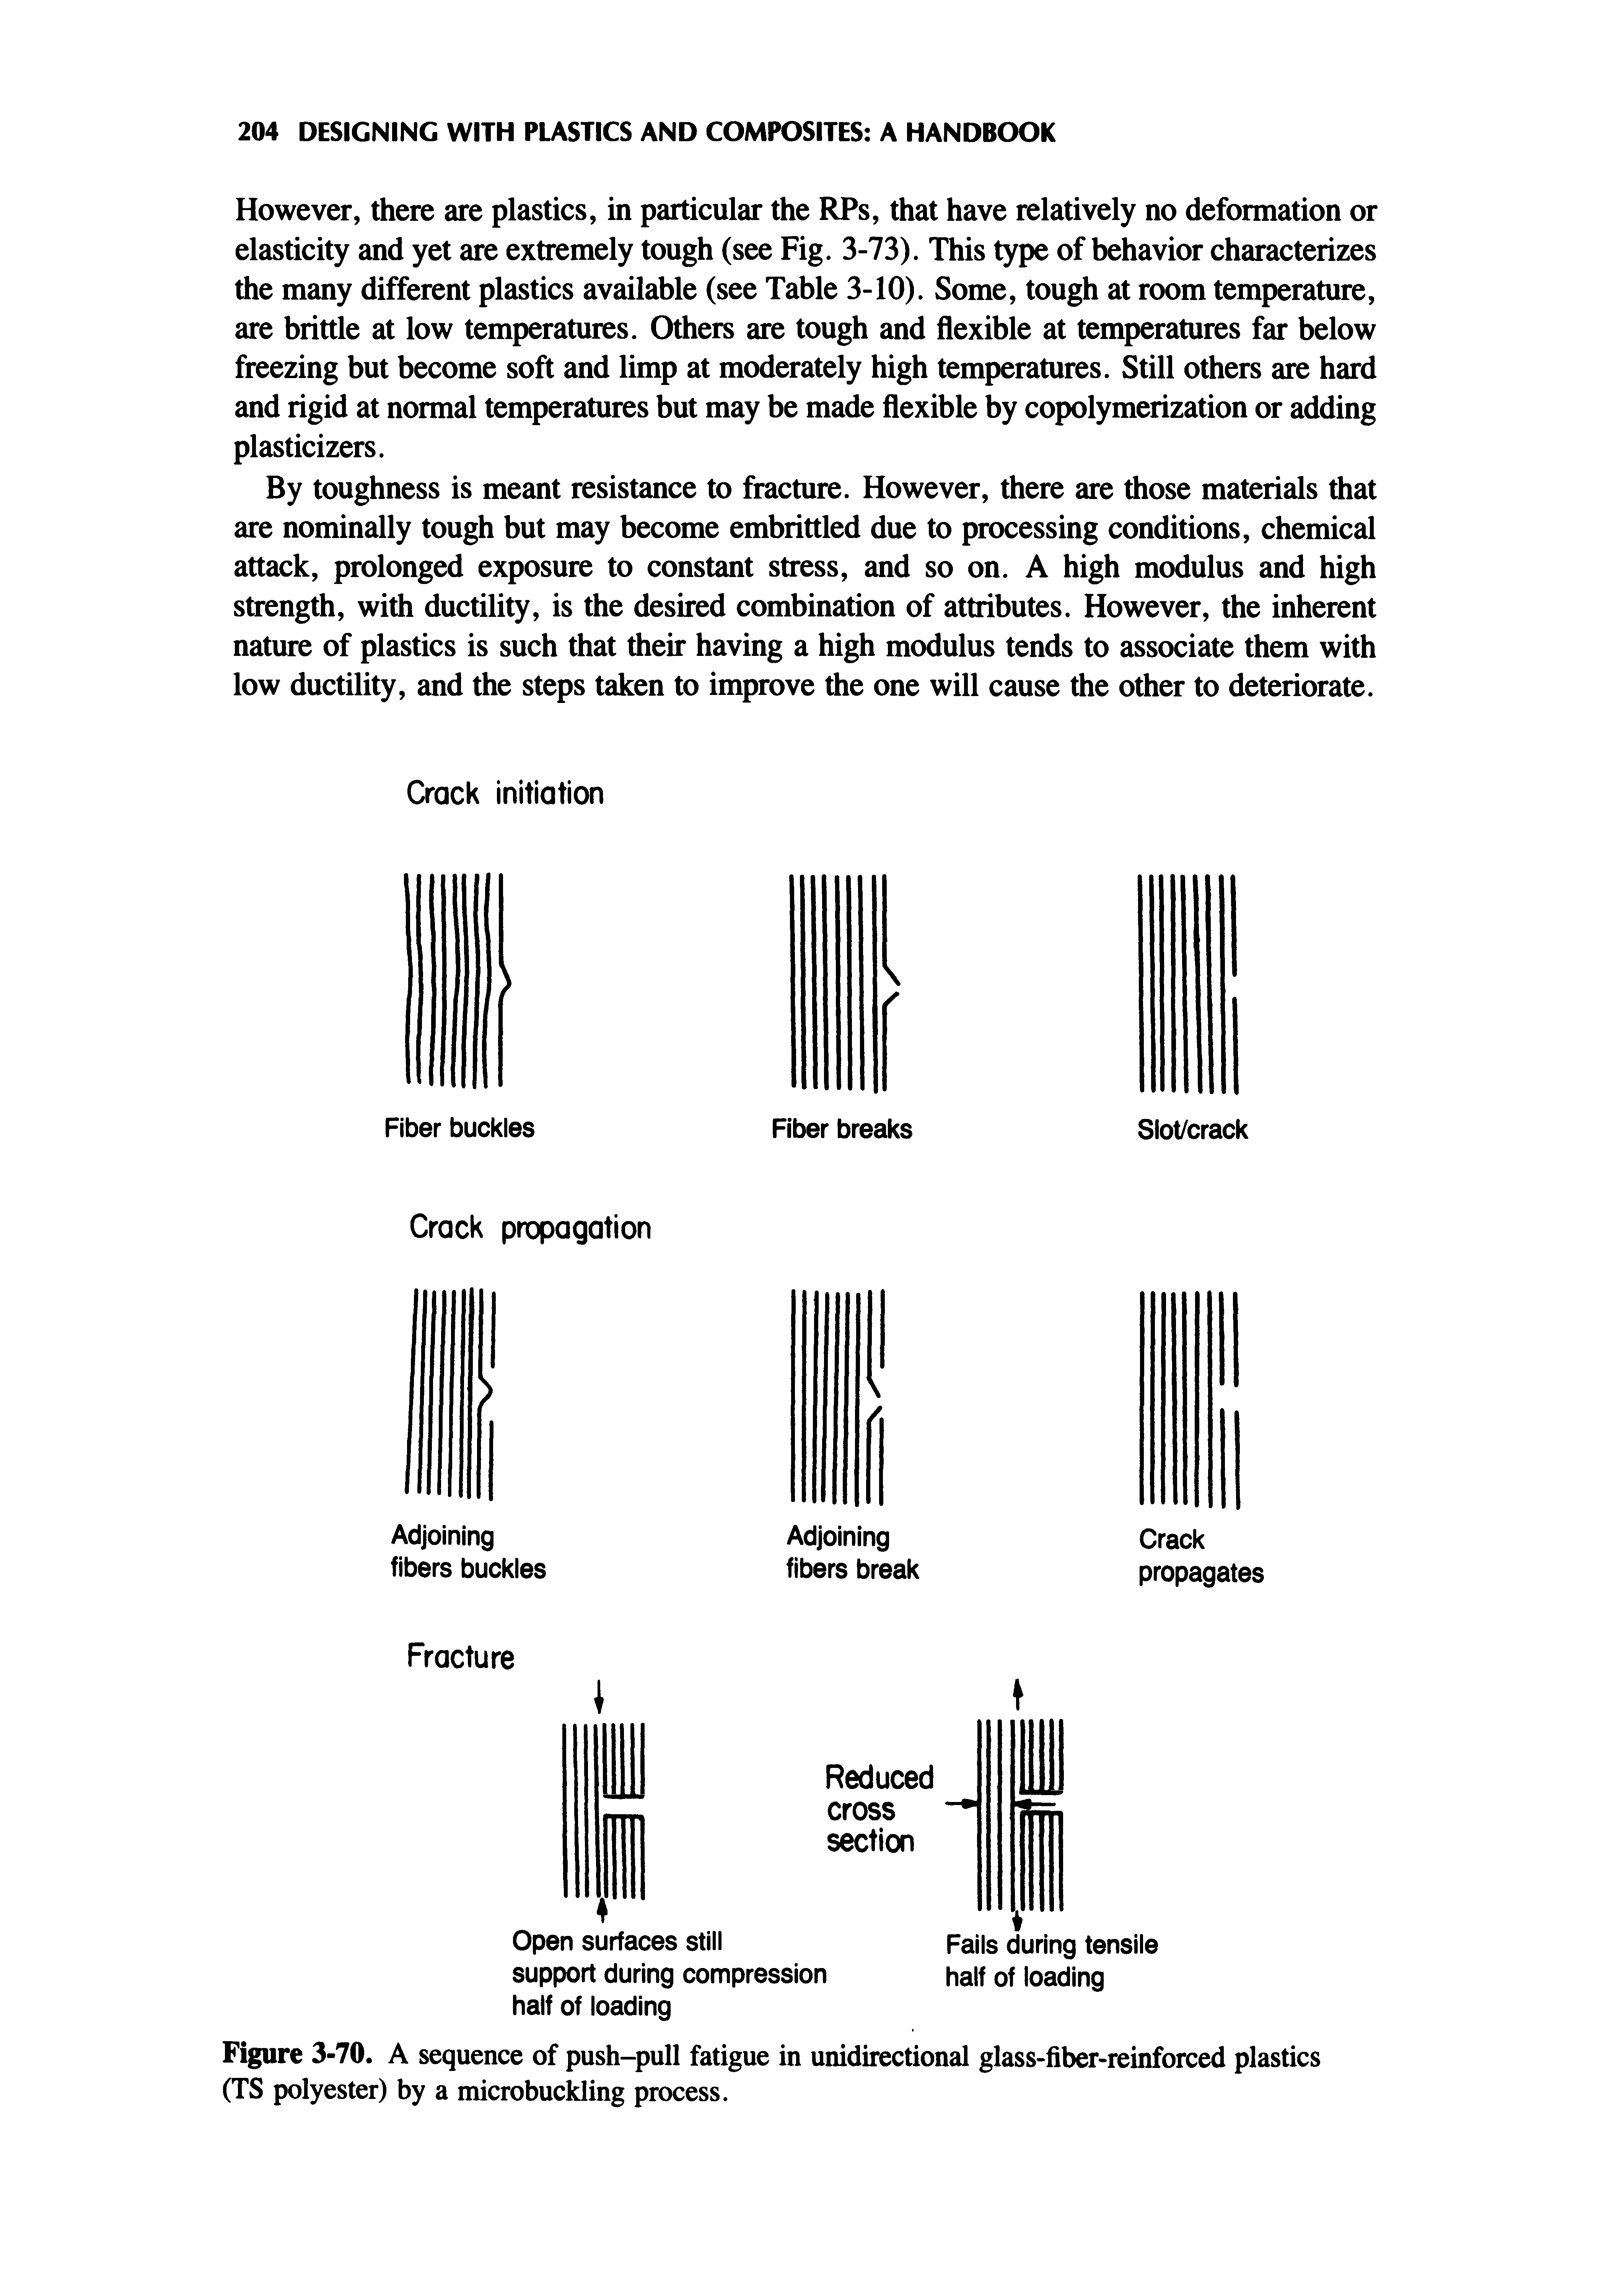 Figure 3-70. A sequence of push-pull fatigue in unidirectional glass-fiber-reinforced plastics (TS polyester) by a microbuckling process.